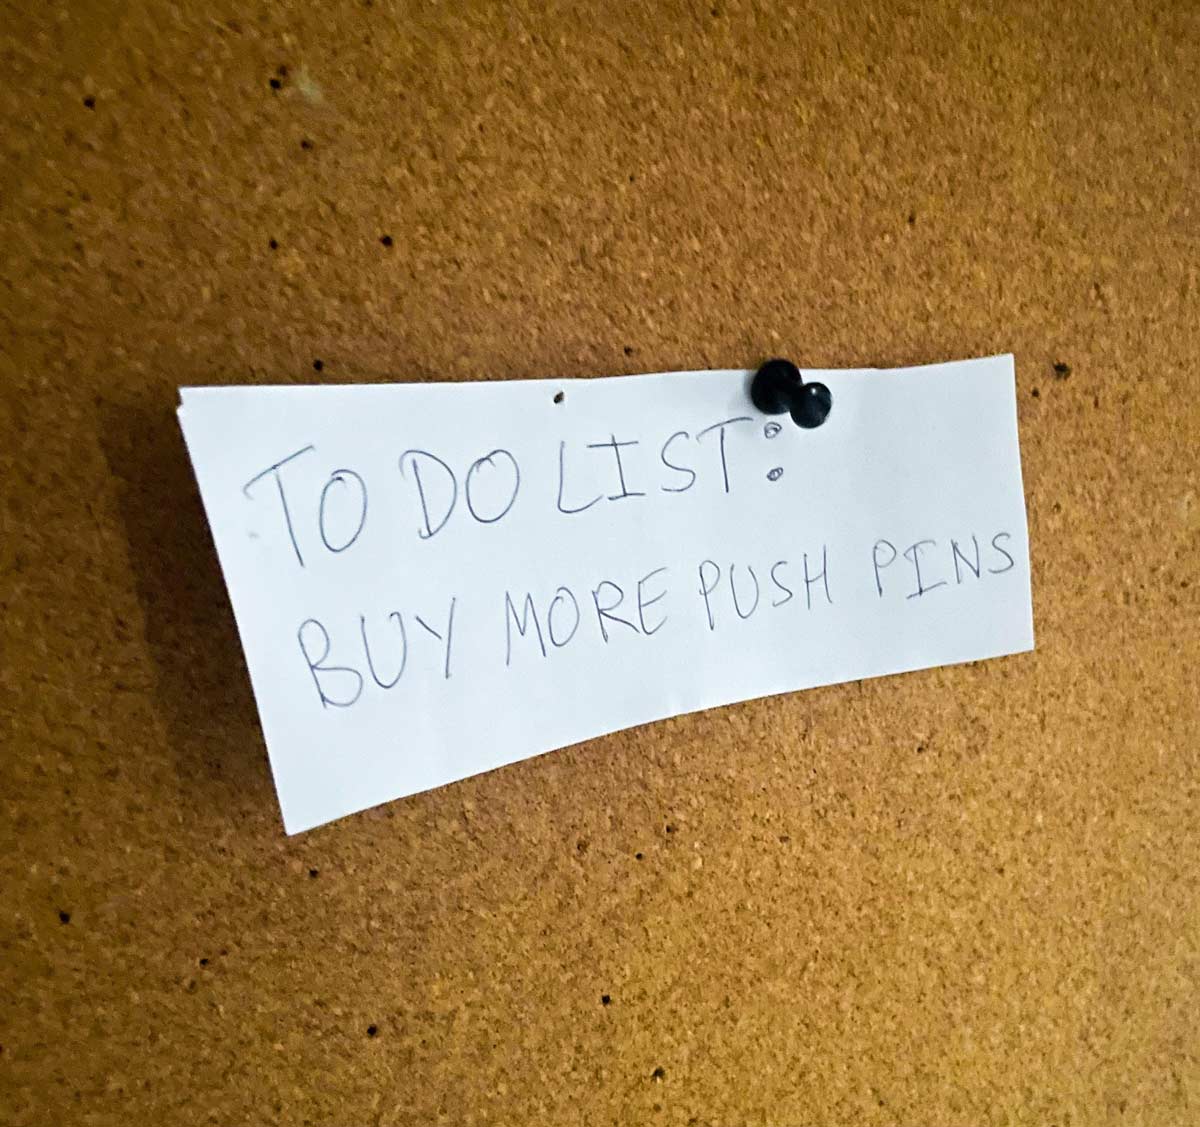 I just moved into a furnished apartment, the previous tenant only left me one push pin and a note on the cork board